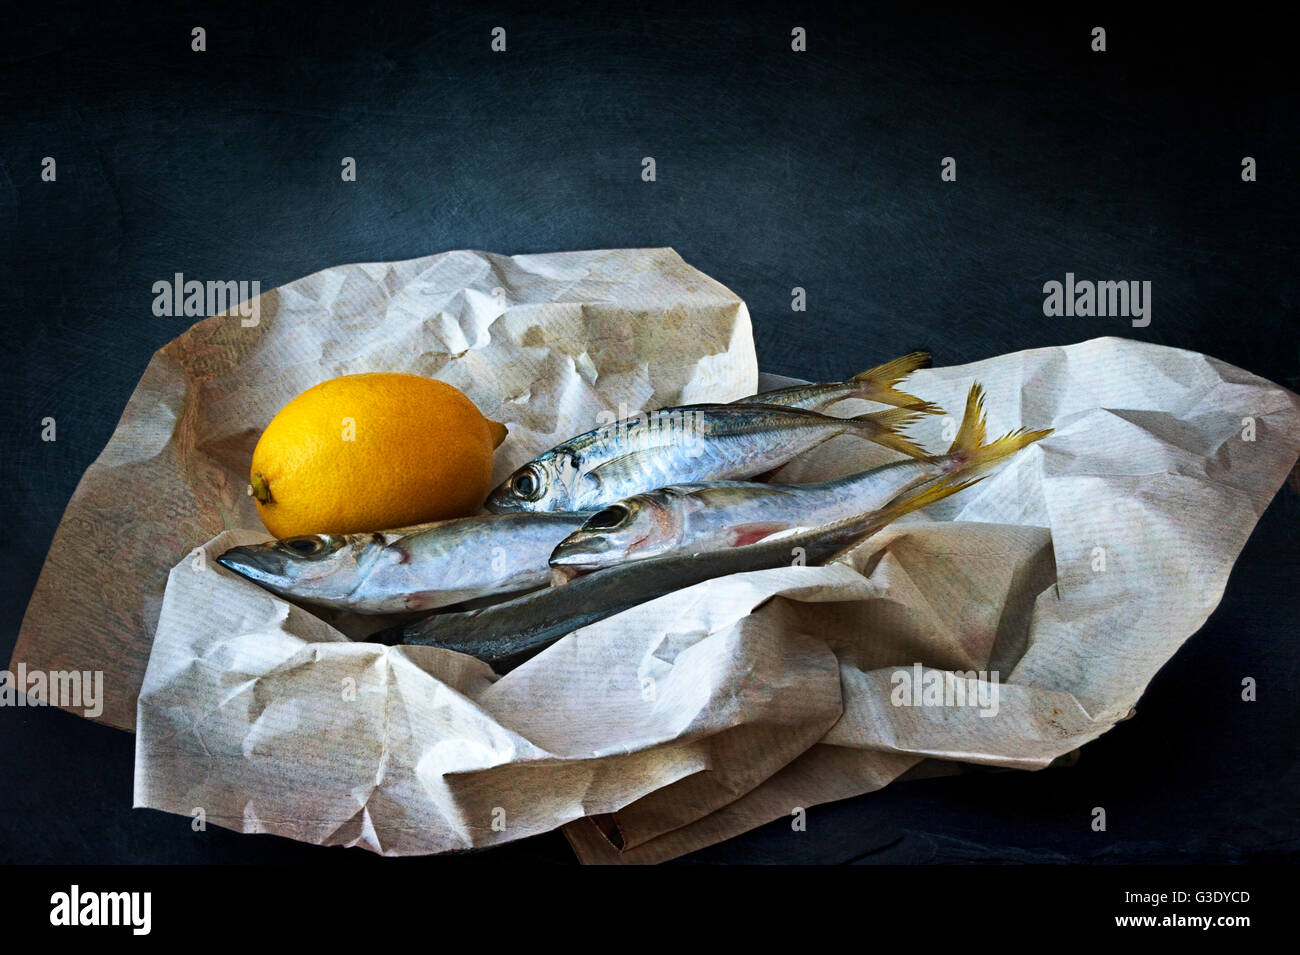 Fresh sardines with lemon wrapped in paper Stock Photo